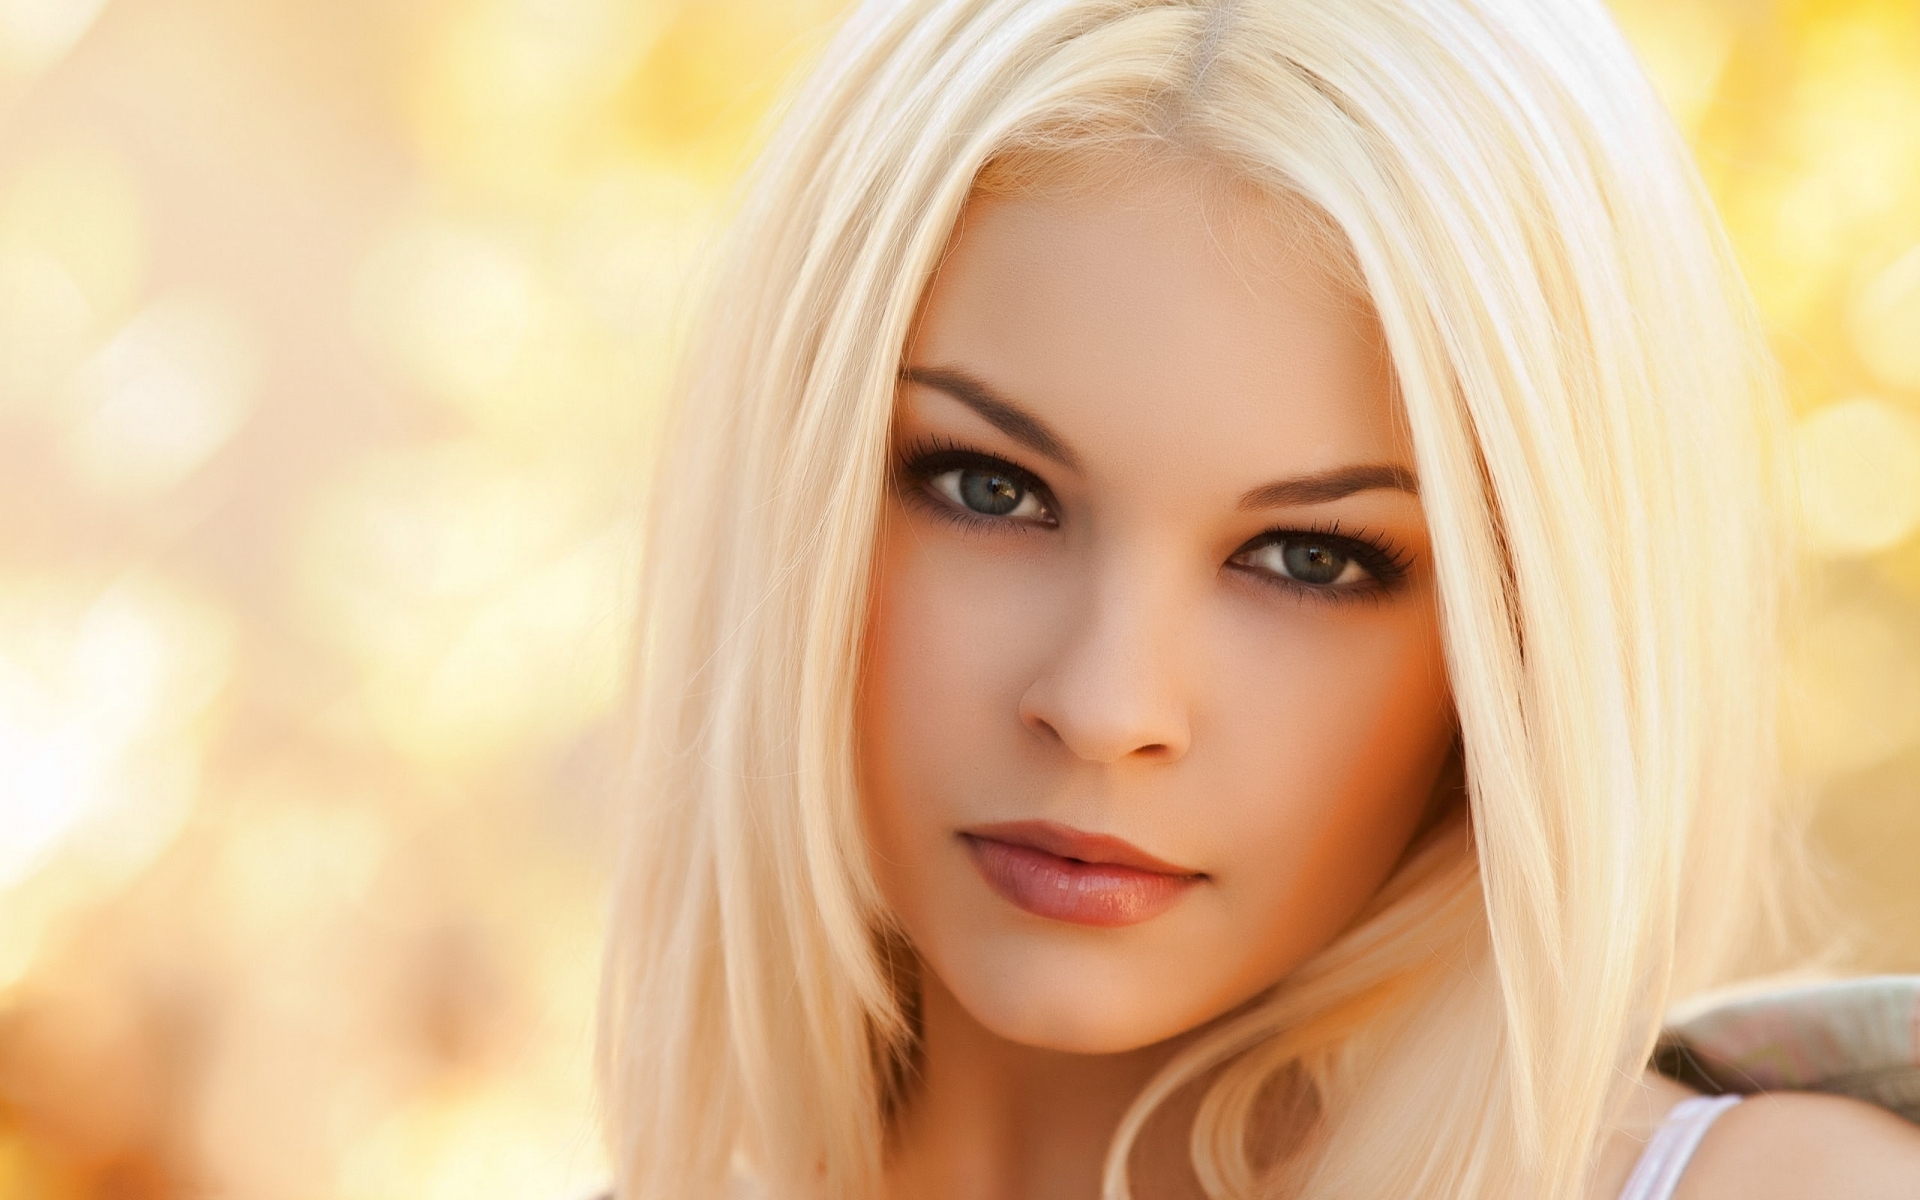 1. "20 Stunning Blonde Haircuts for Women" - wide 3